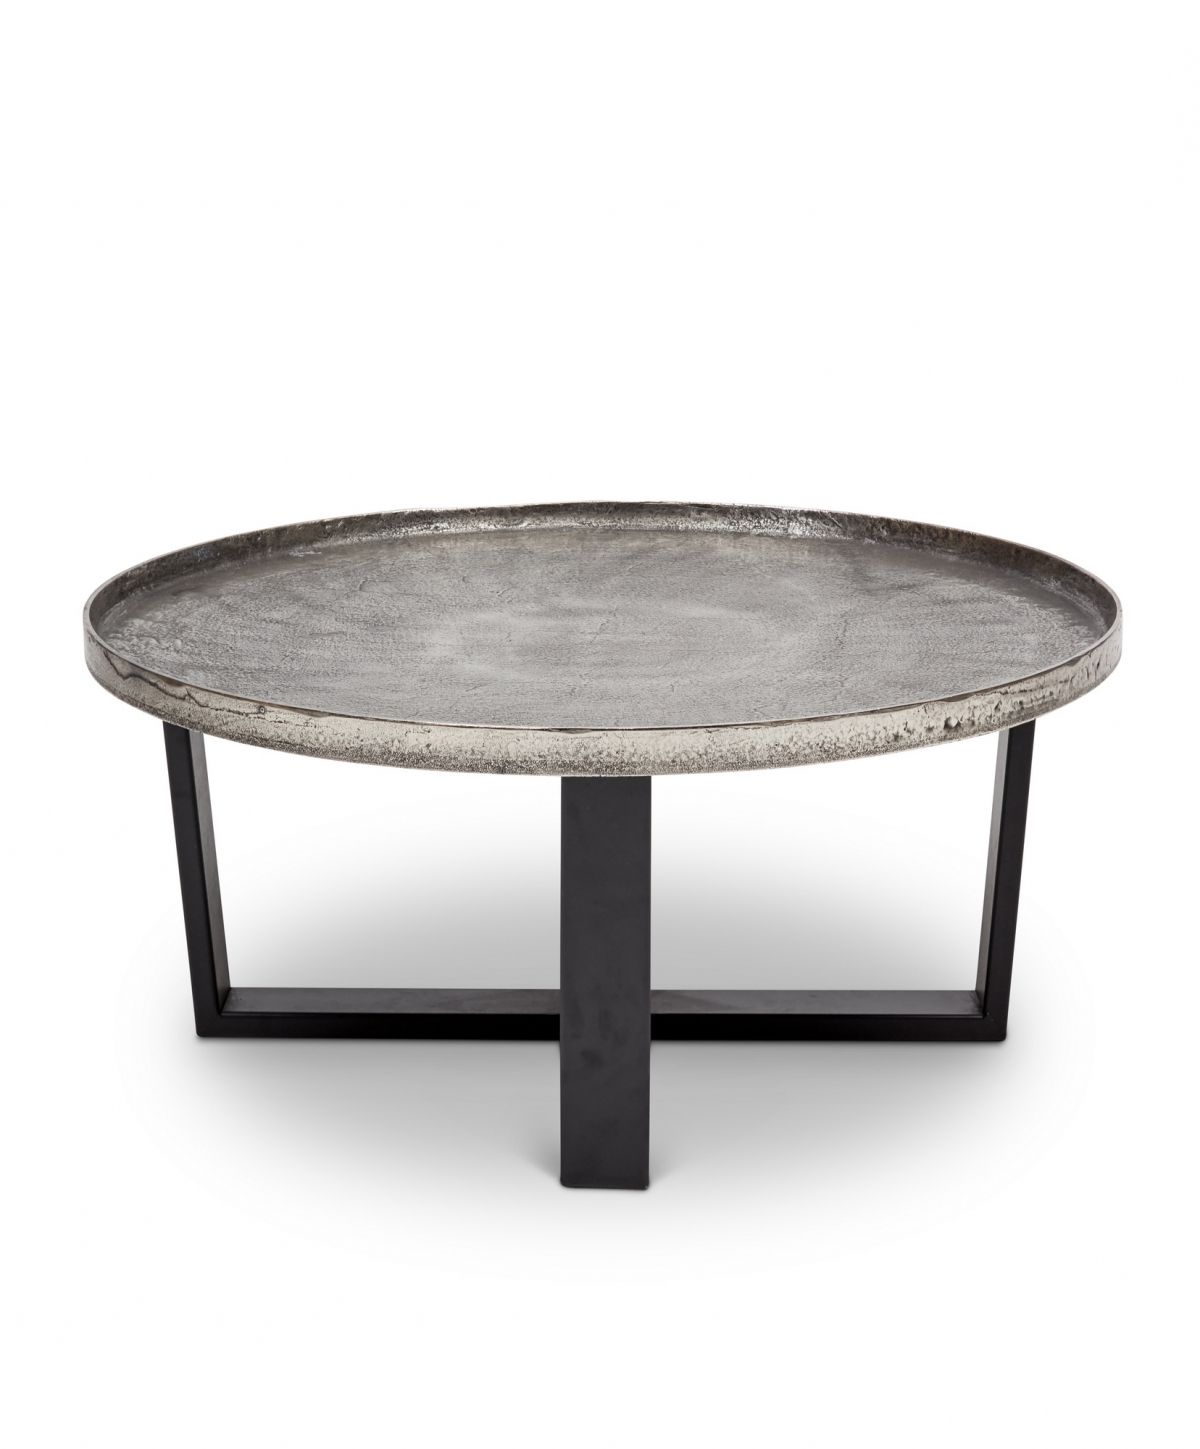 Zara Coffee Table In Vintage Silver With Well Known Antique Silver Metal Coffee Tables (View 5 of 20)